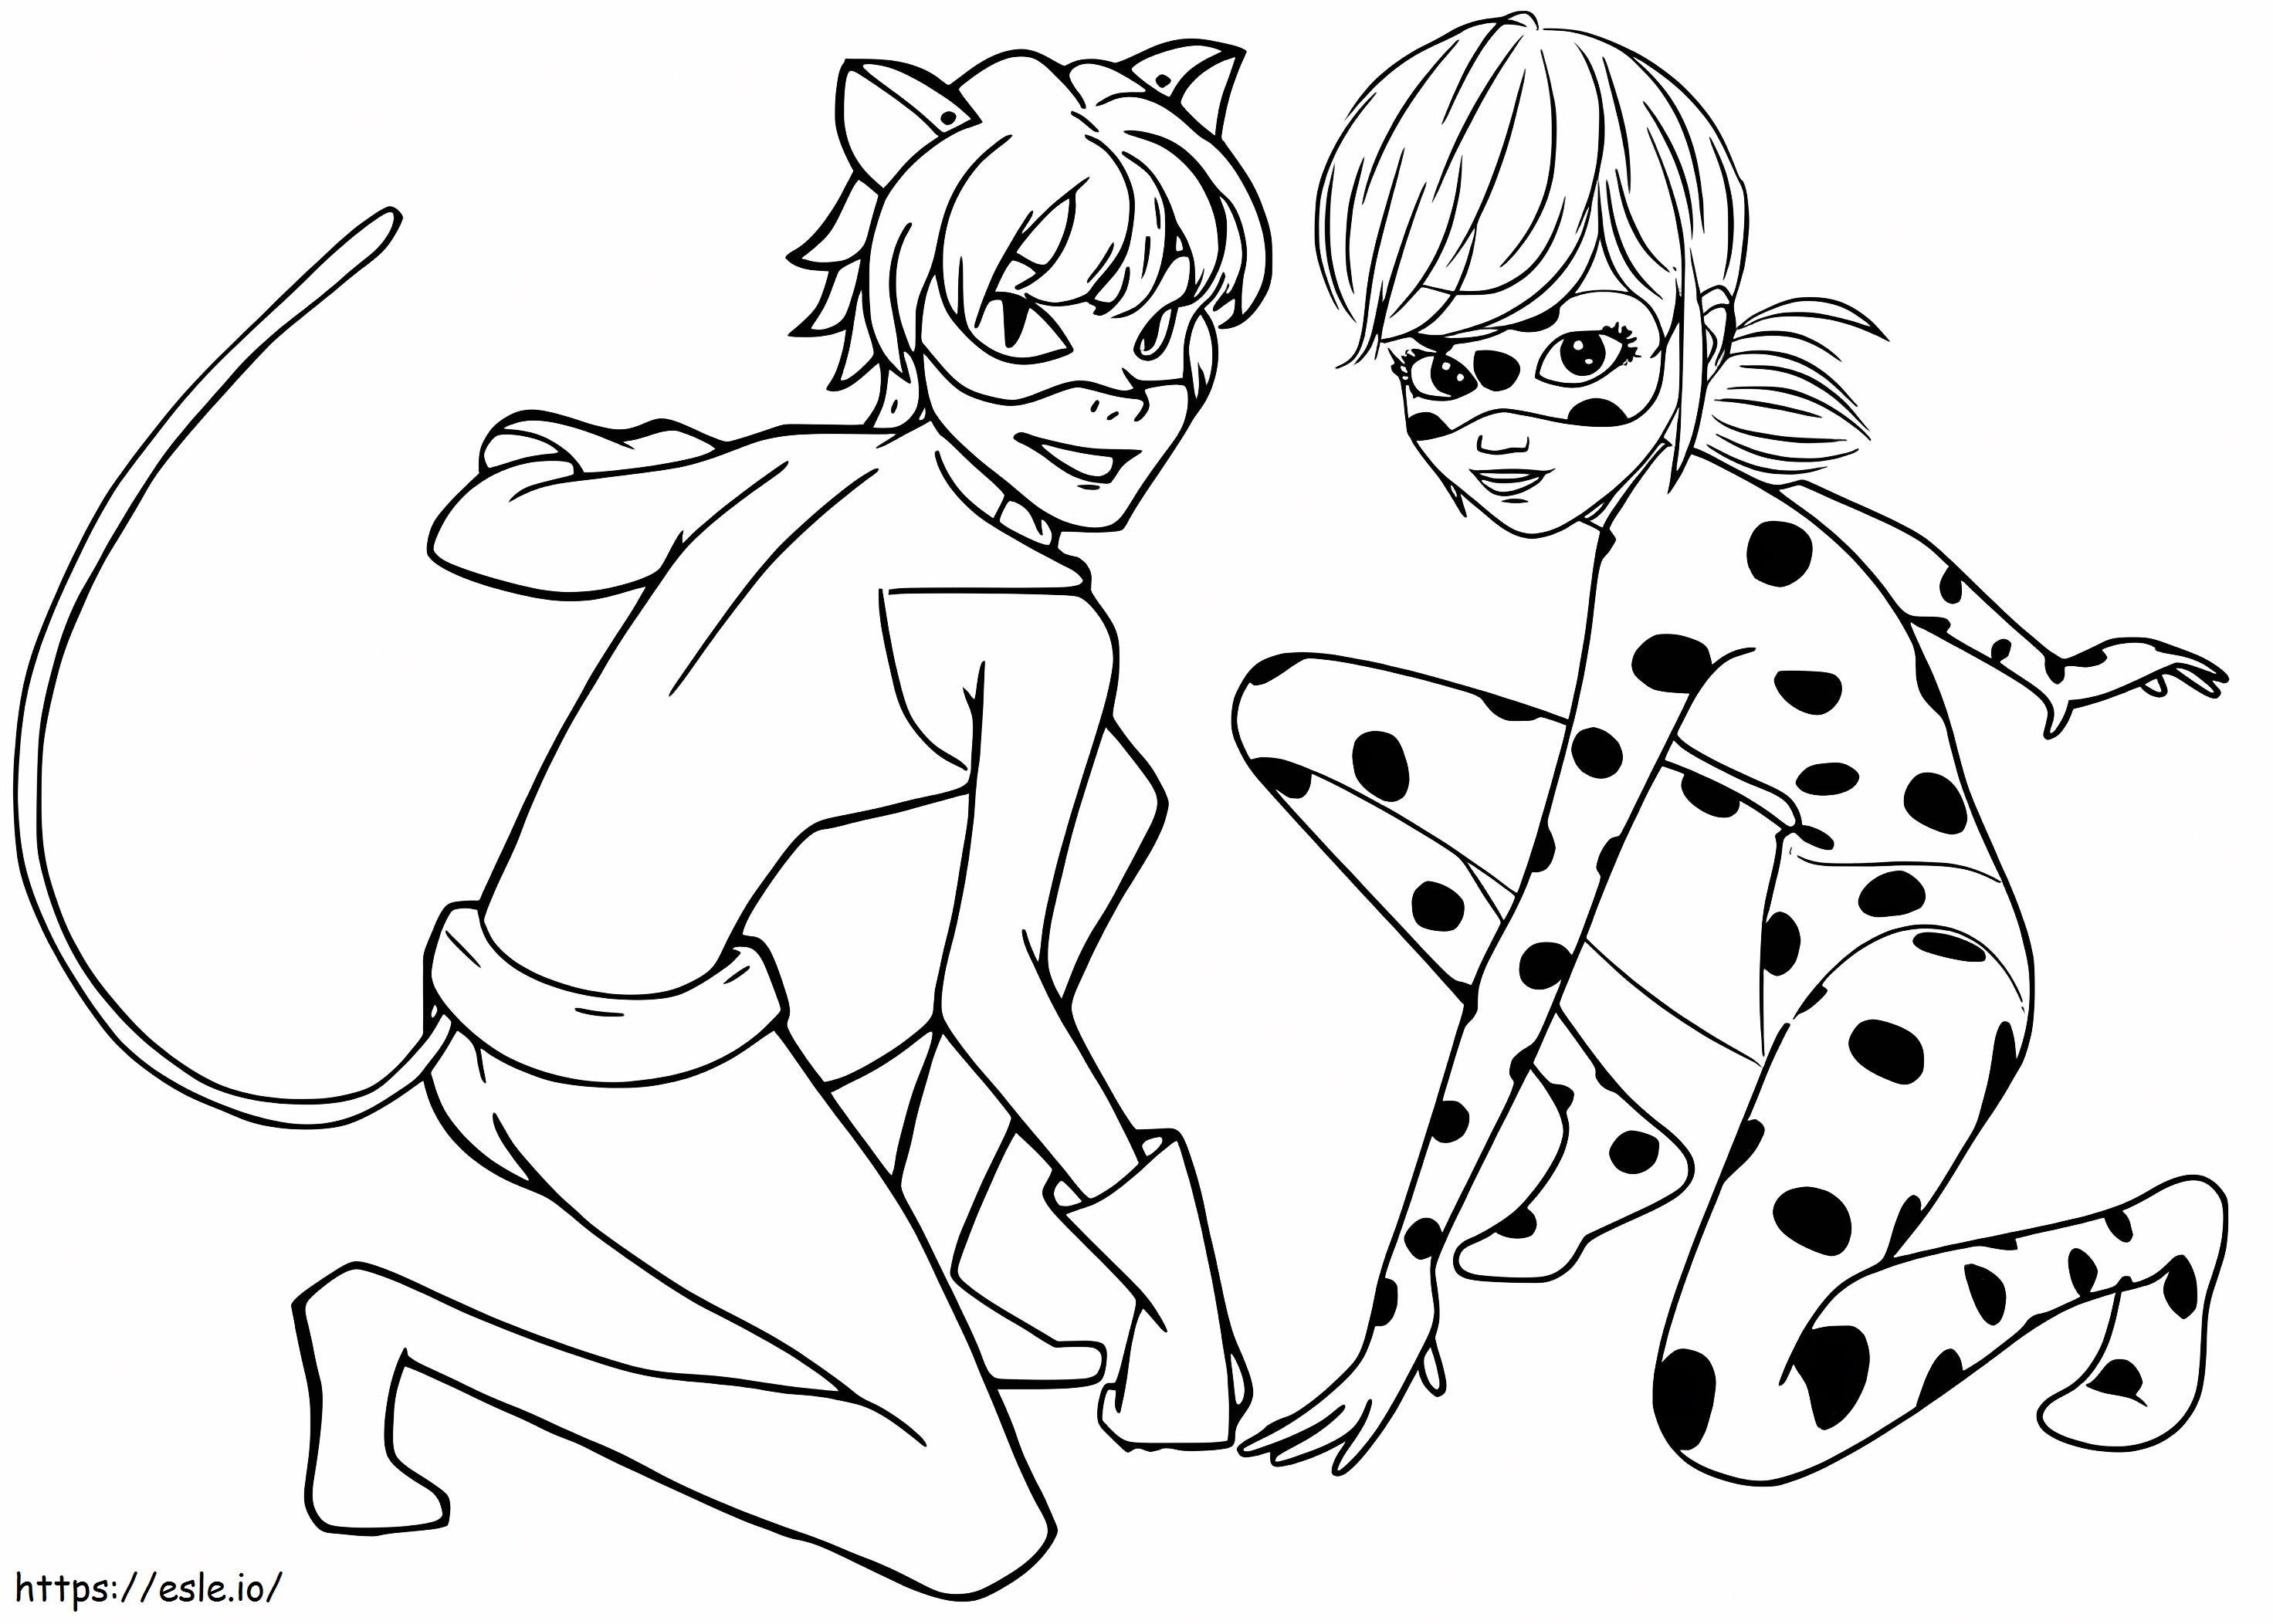 Basic Ladybug And Cat Noir coloring page